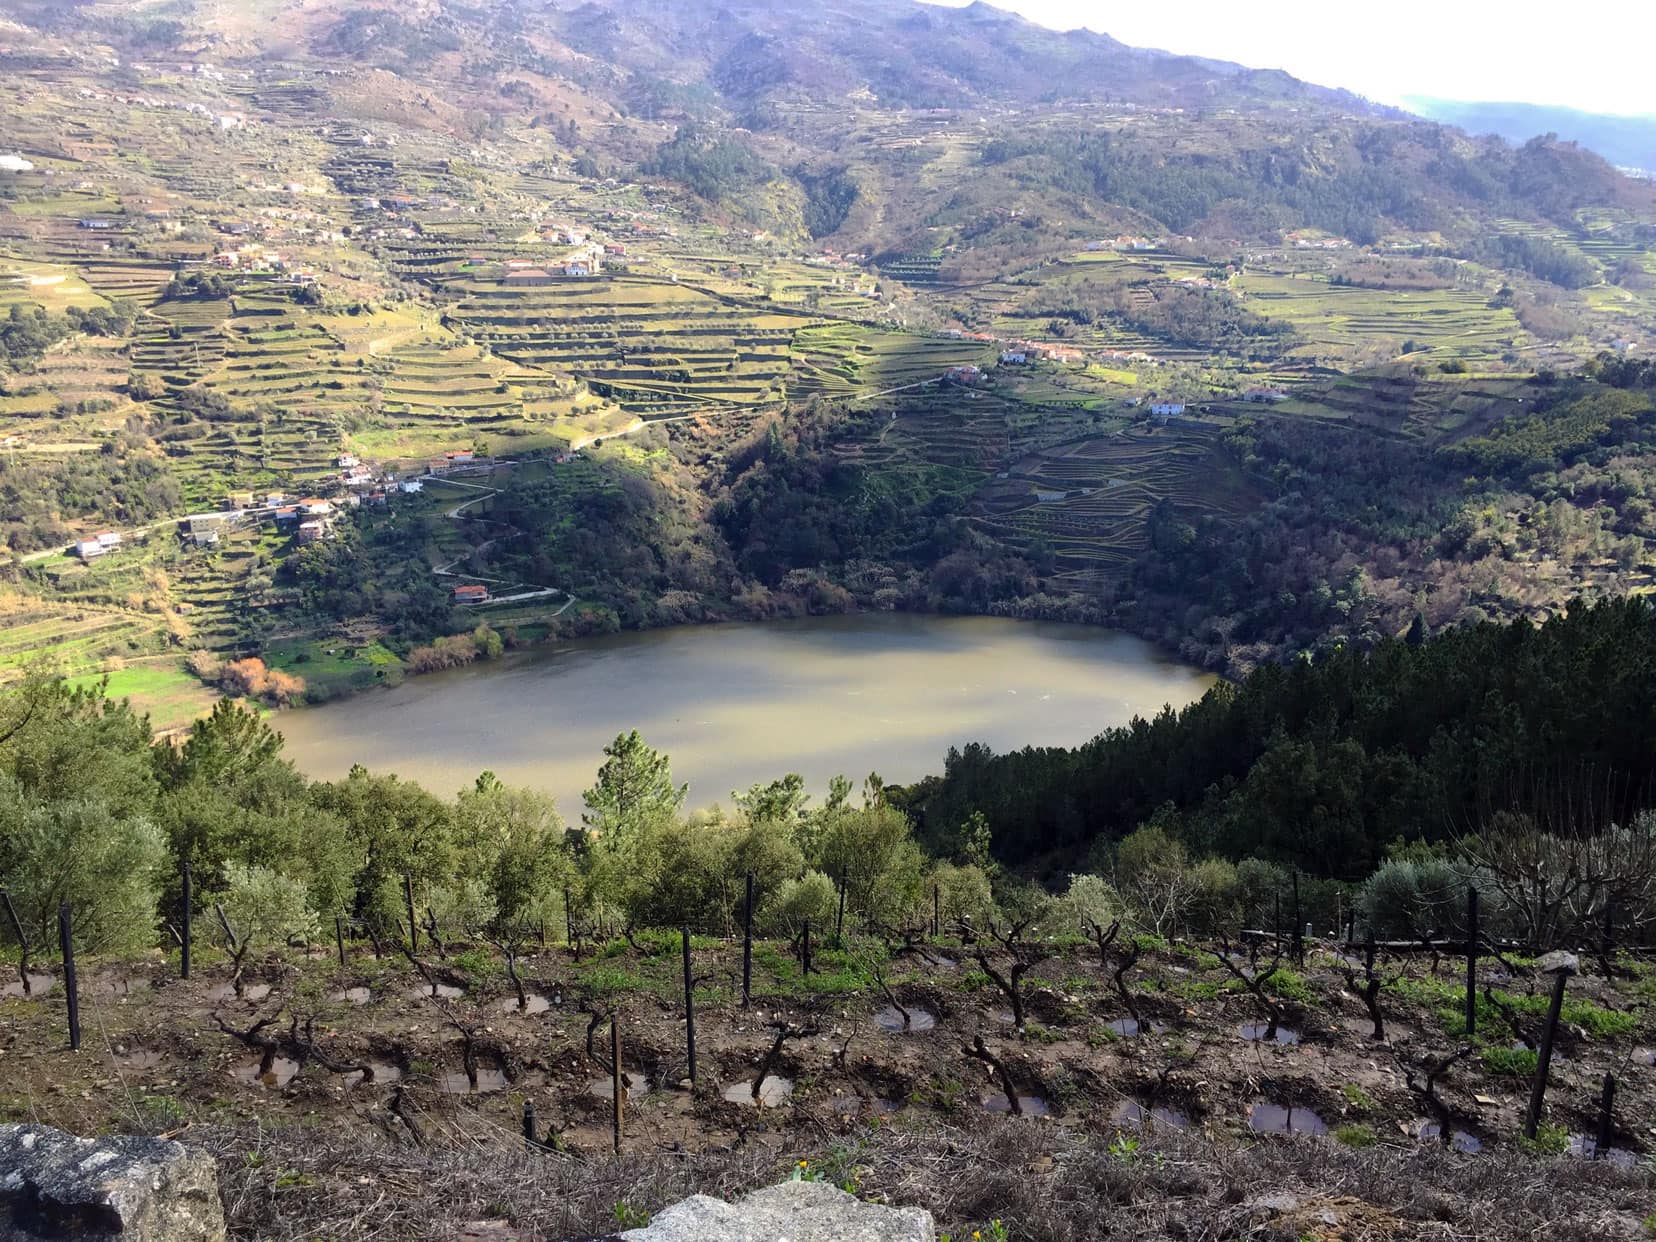 View of Douro River with grape vine terraces on the surrounding hills